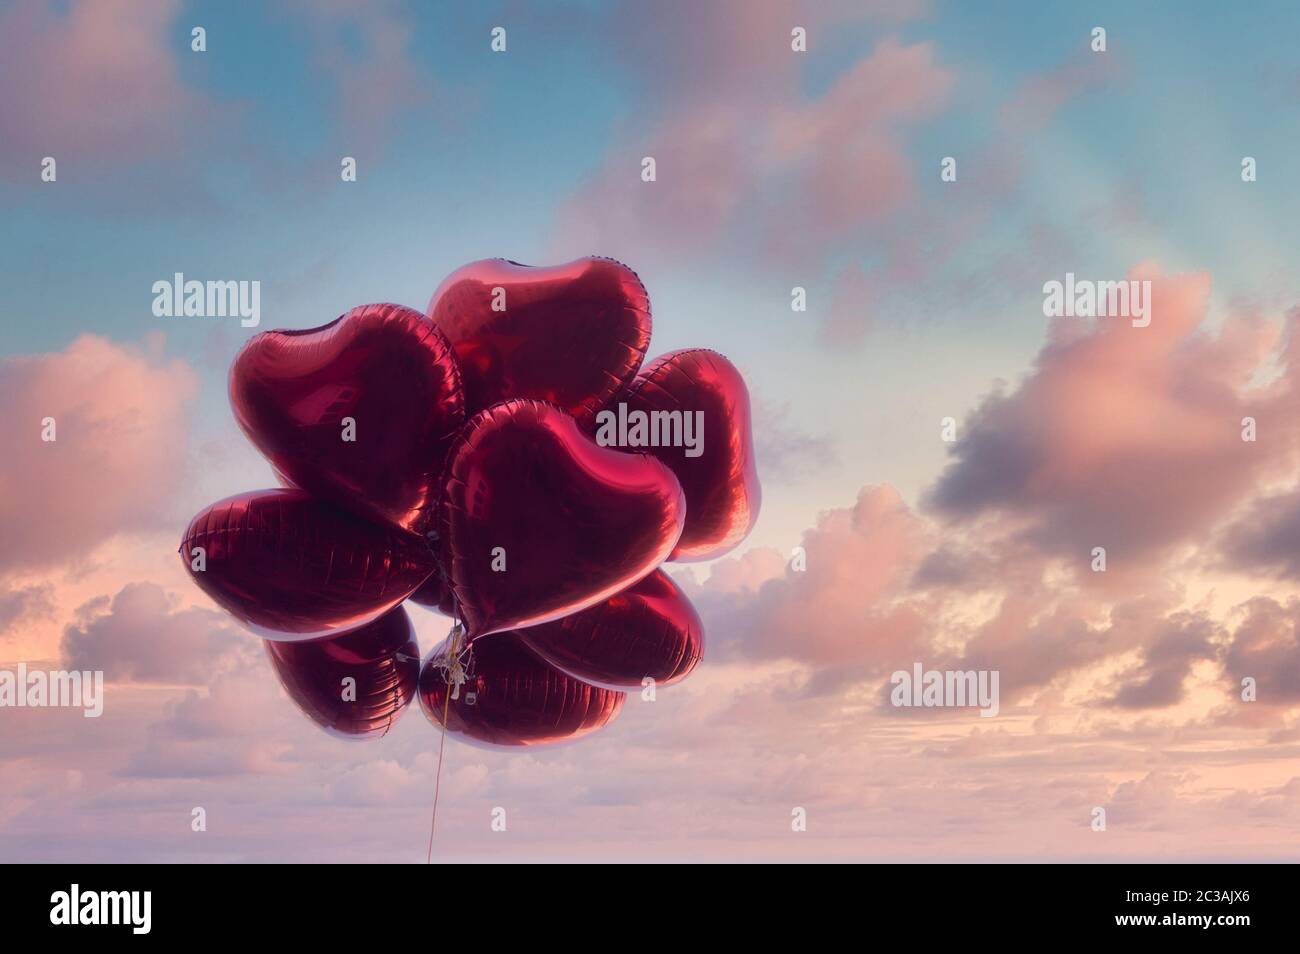 Group of heart shaped red air baloon on dramatic sky with pink clouds. Valentine's day and romance concept. Stock Photo